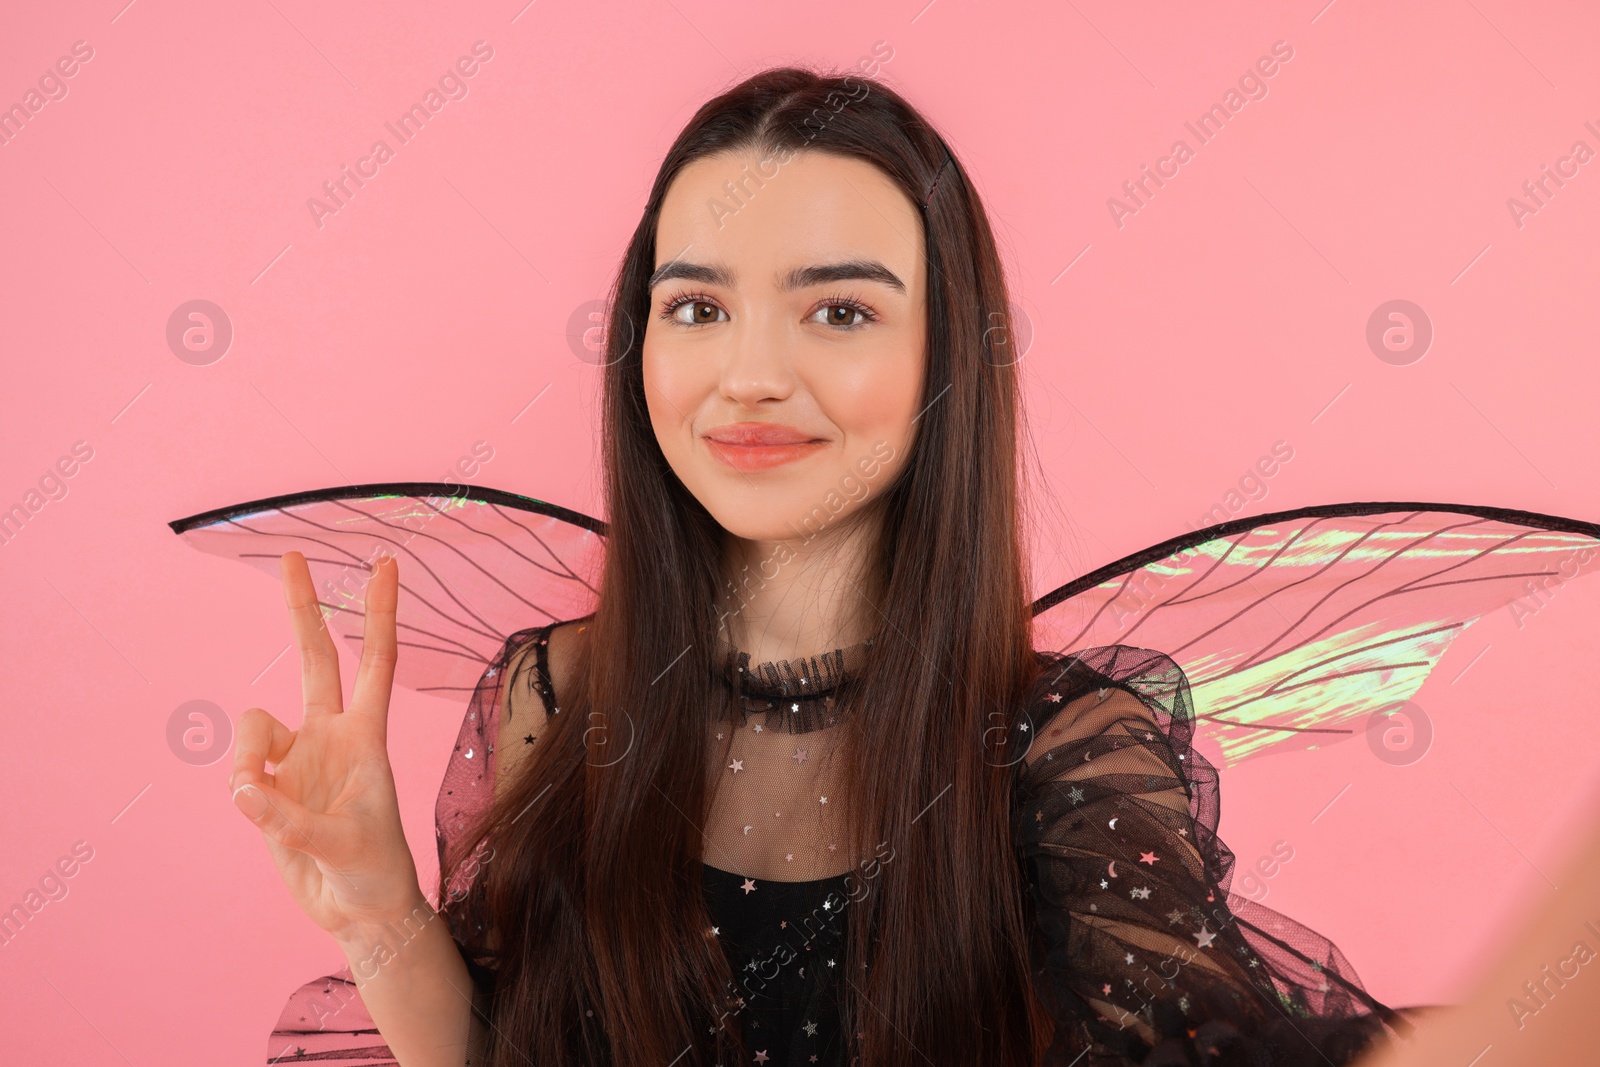 Photo of Beautiful girl in fairy costume with wings taking selfie and showing peace sign on pink background